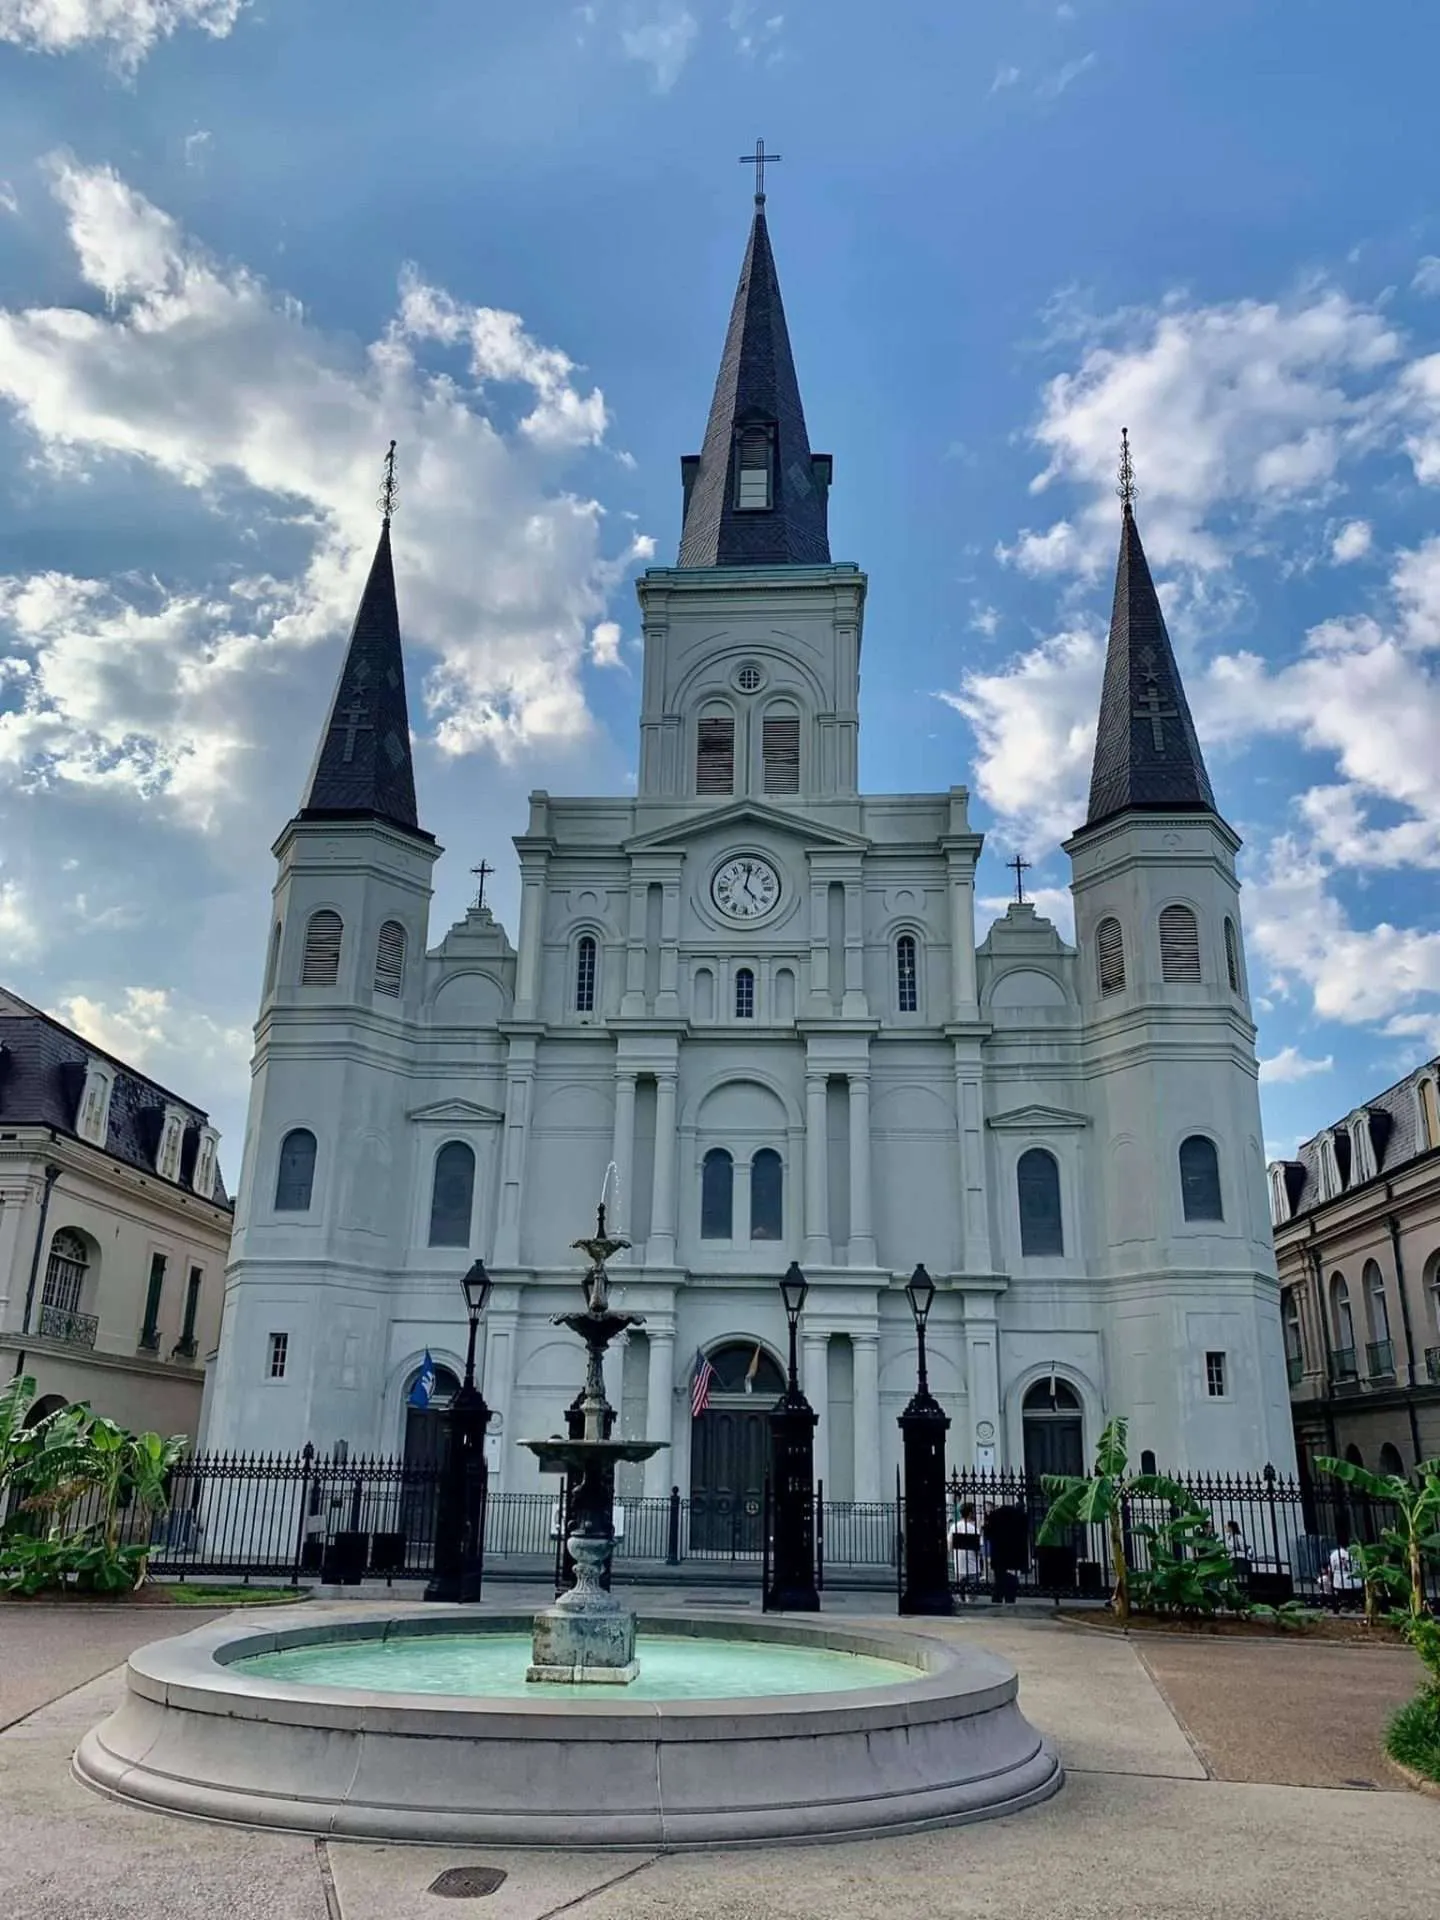 Things to do at Fort Johnson: Take pictures of Jackson Square and the St. Louis Cathedral.